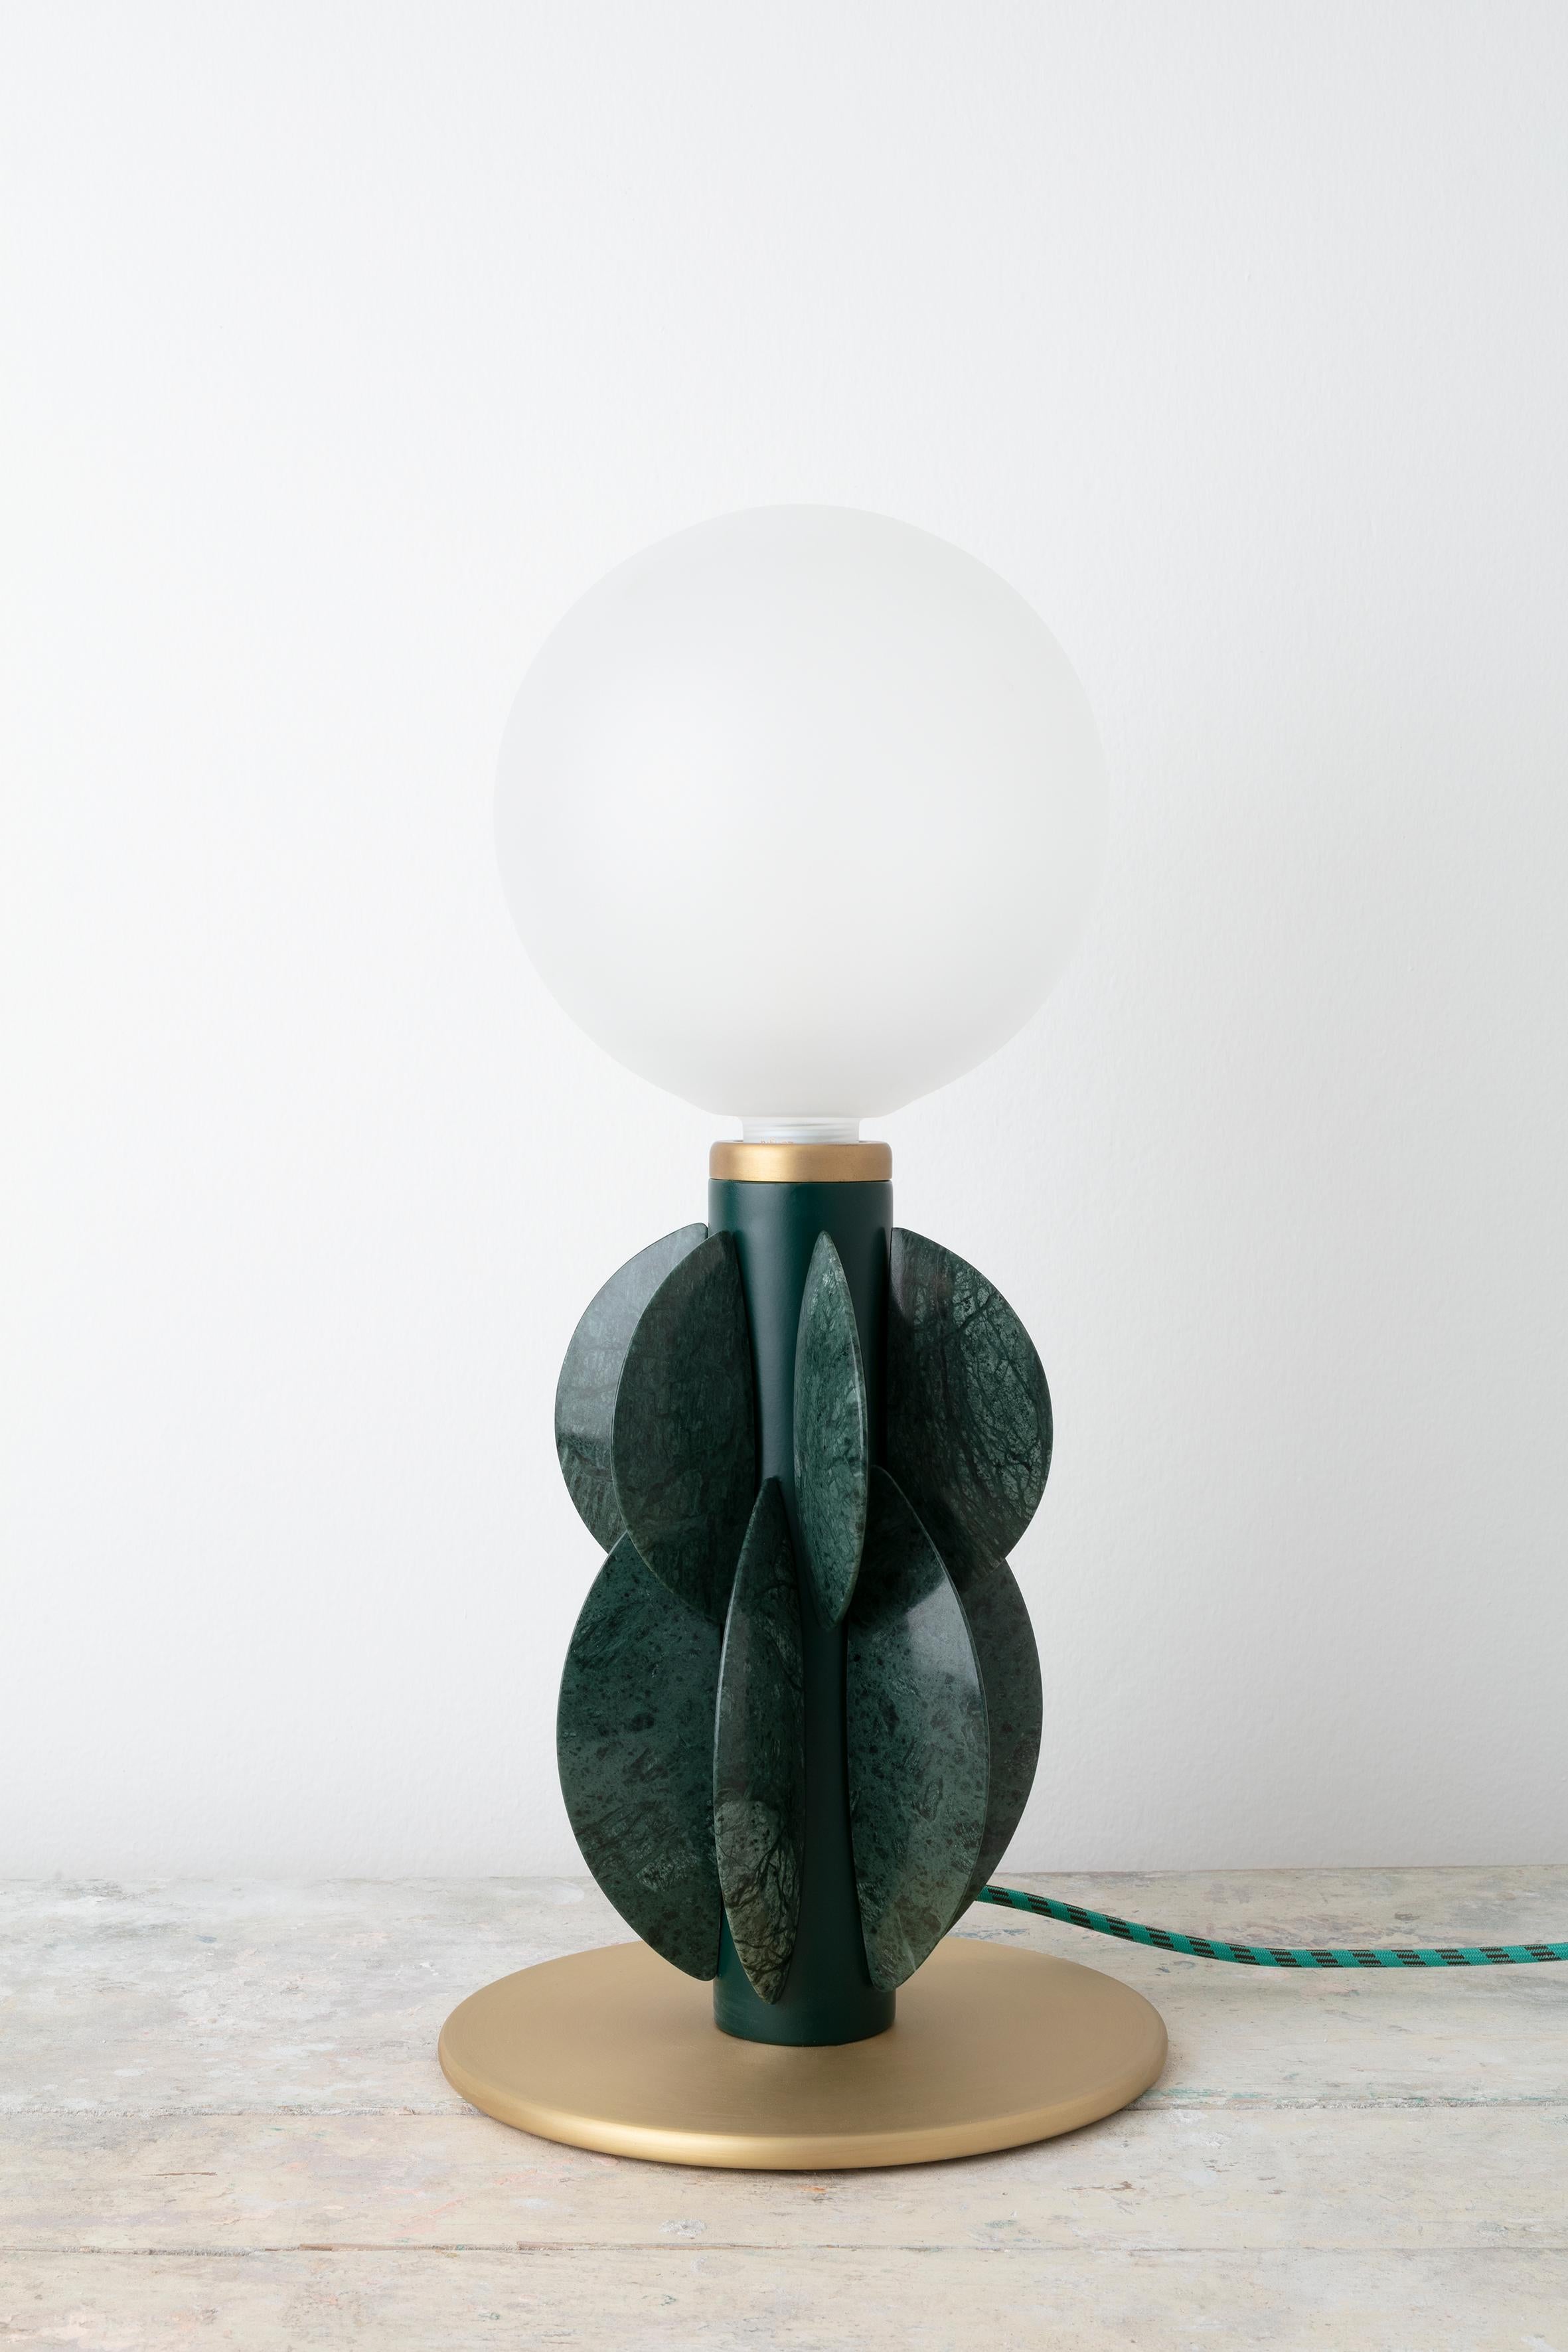 Monarch table lamp with glass dome - Carla Baz
Dimensions: ø 24 x H 50 cm
Weight: 8.5 kg
Material: Painted metal, Brass, Marble

Monarch lighting series has been developed with the idea of opulence and fine details all the while keeping with our